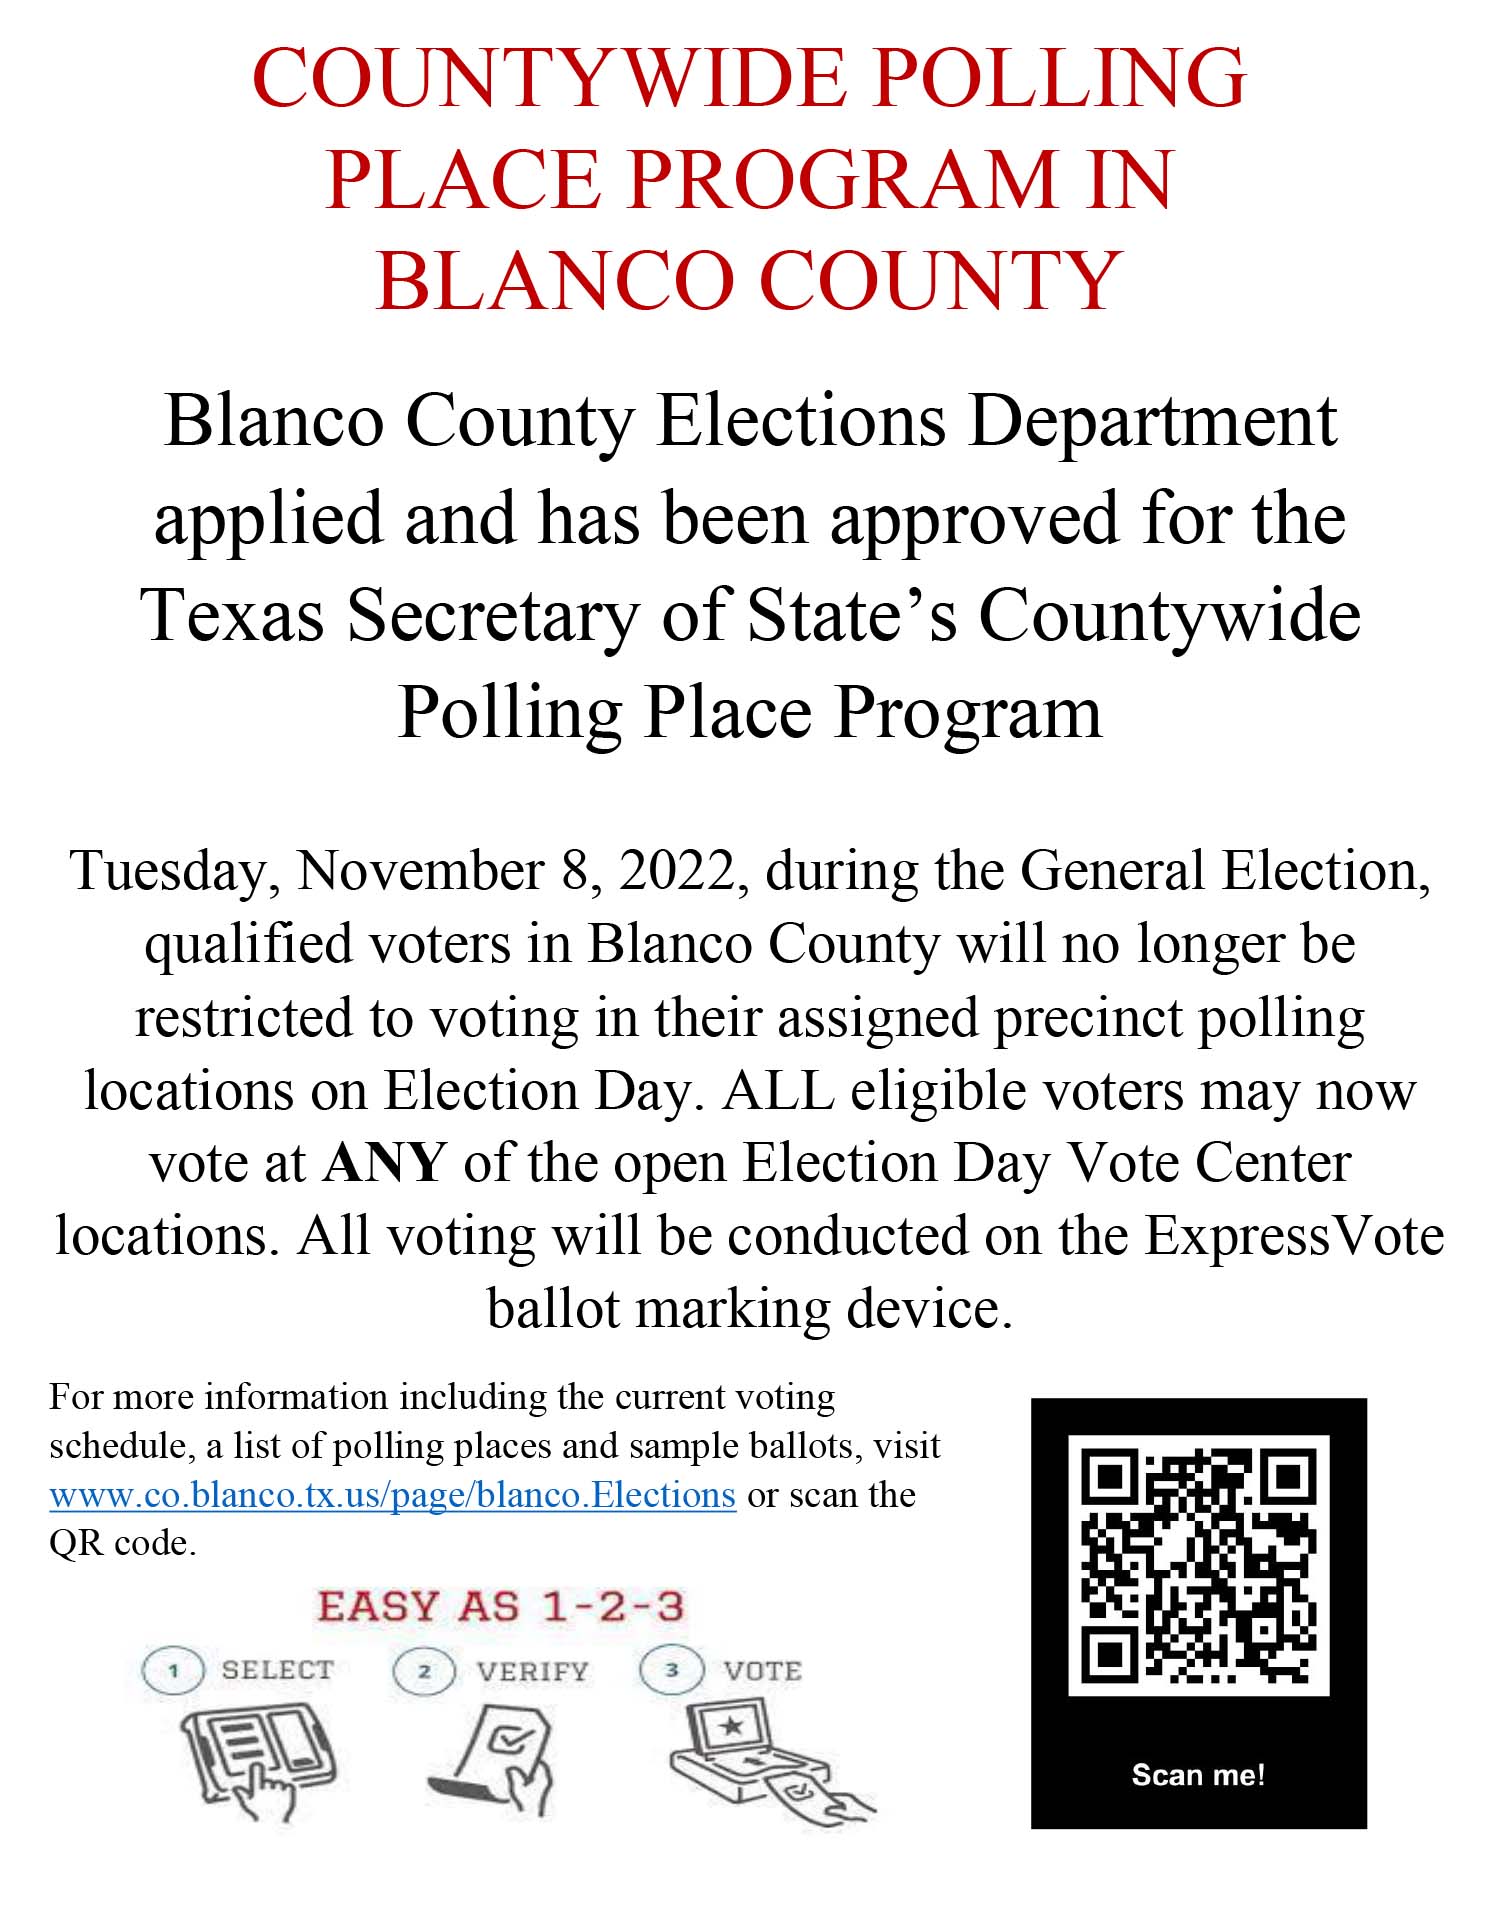 COUNTYWIDE VOTING NOTICE